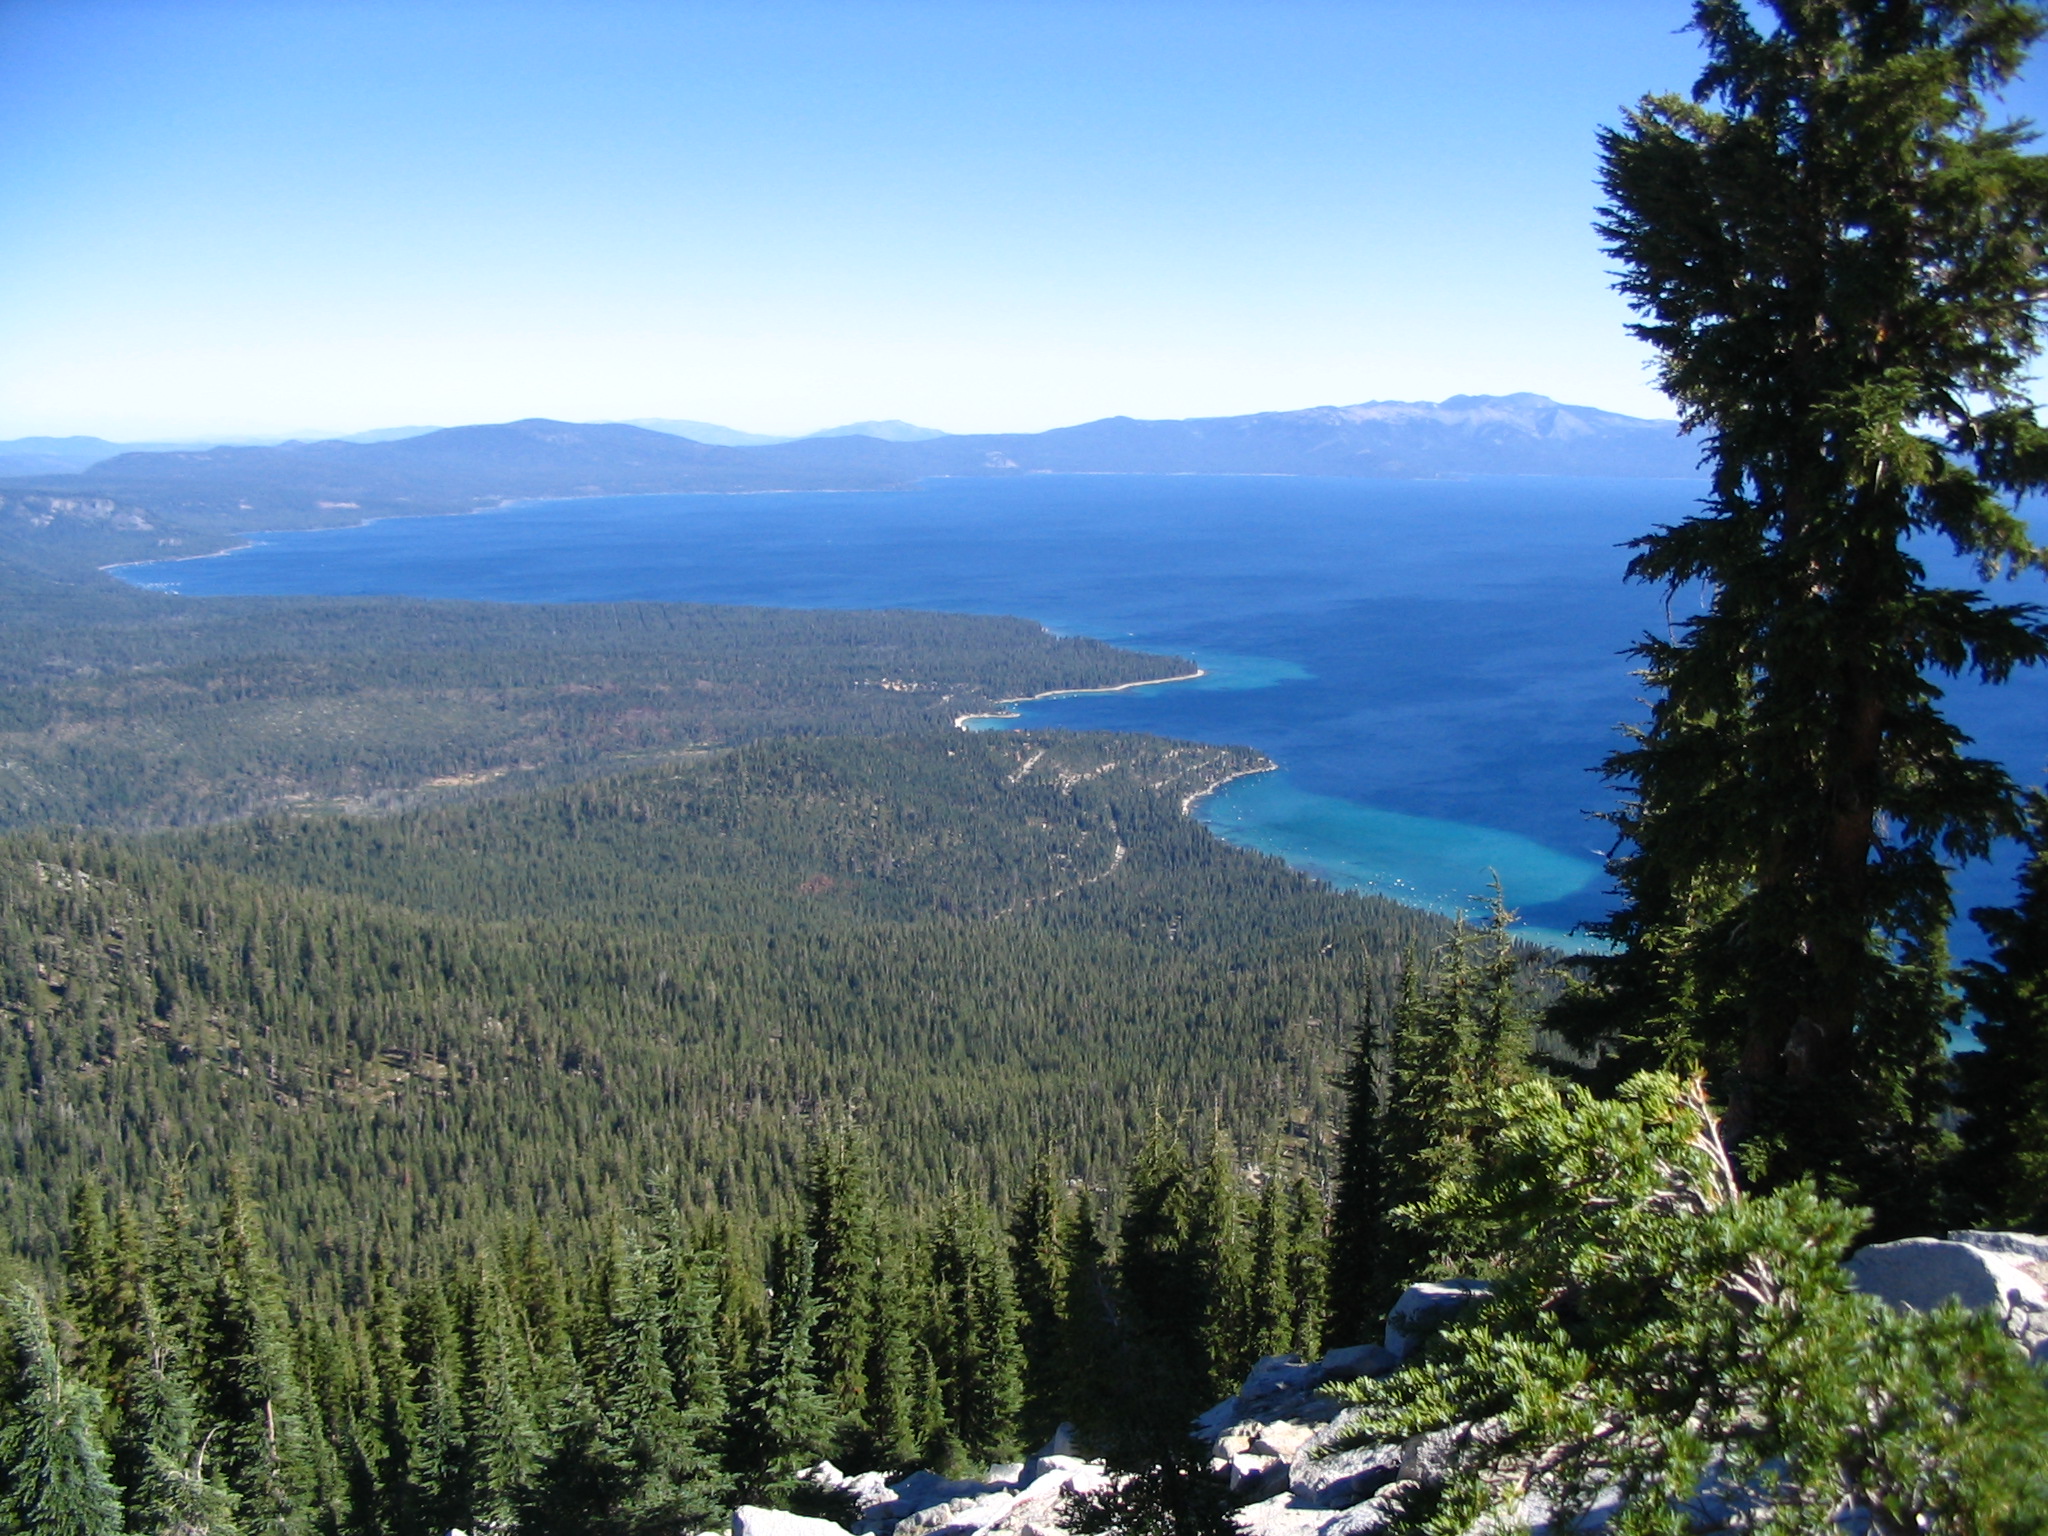 021 lake tahoe thread yes HD Wallpaper   Nature Landscapes 986781